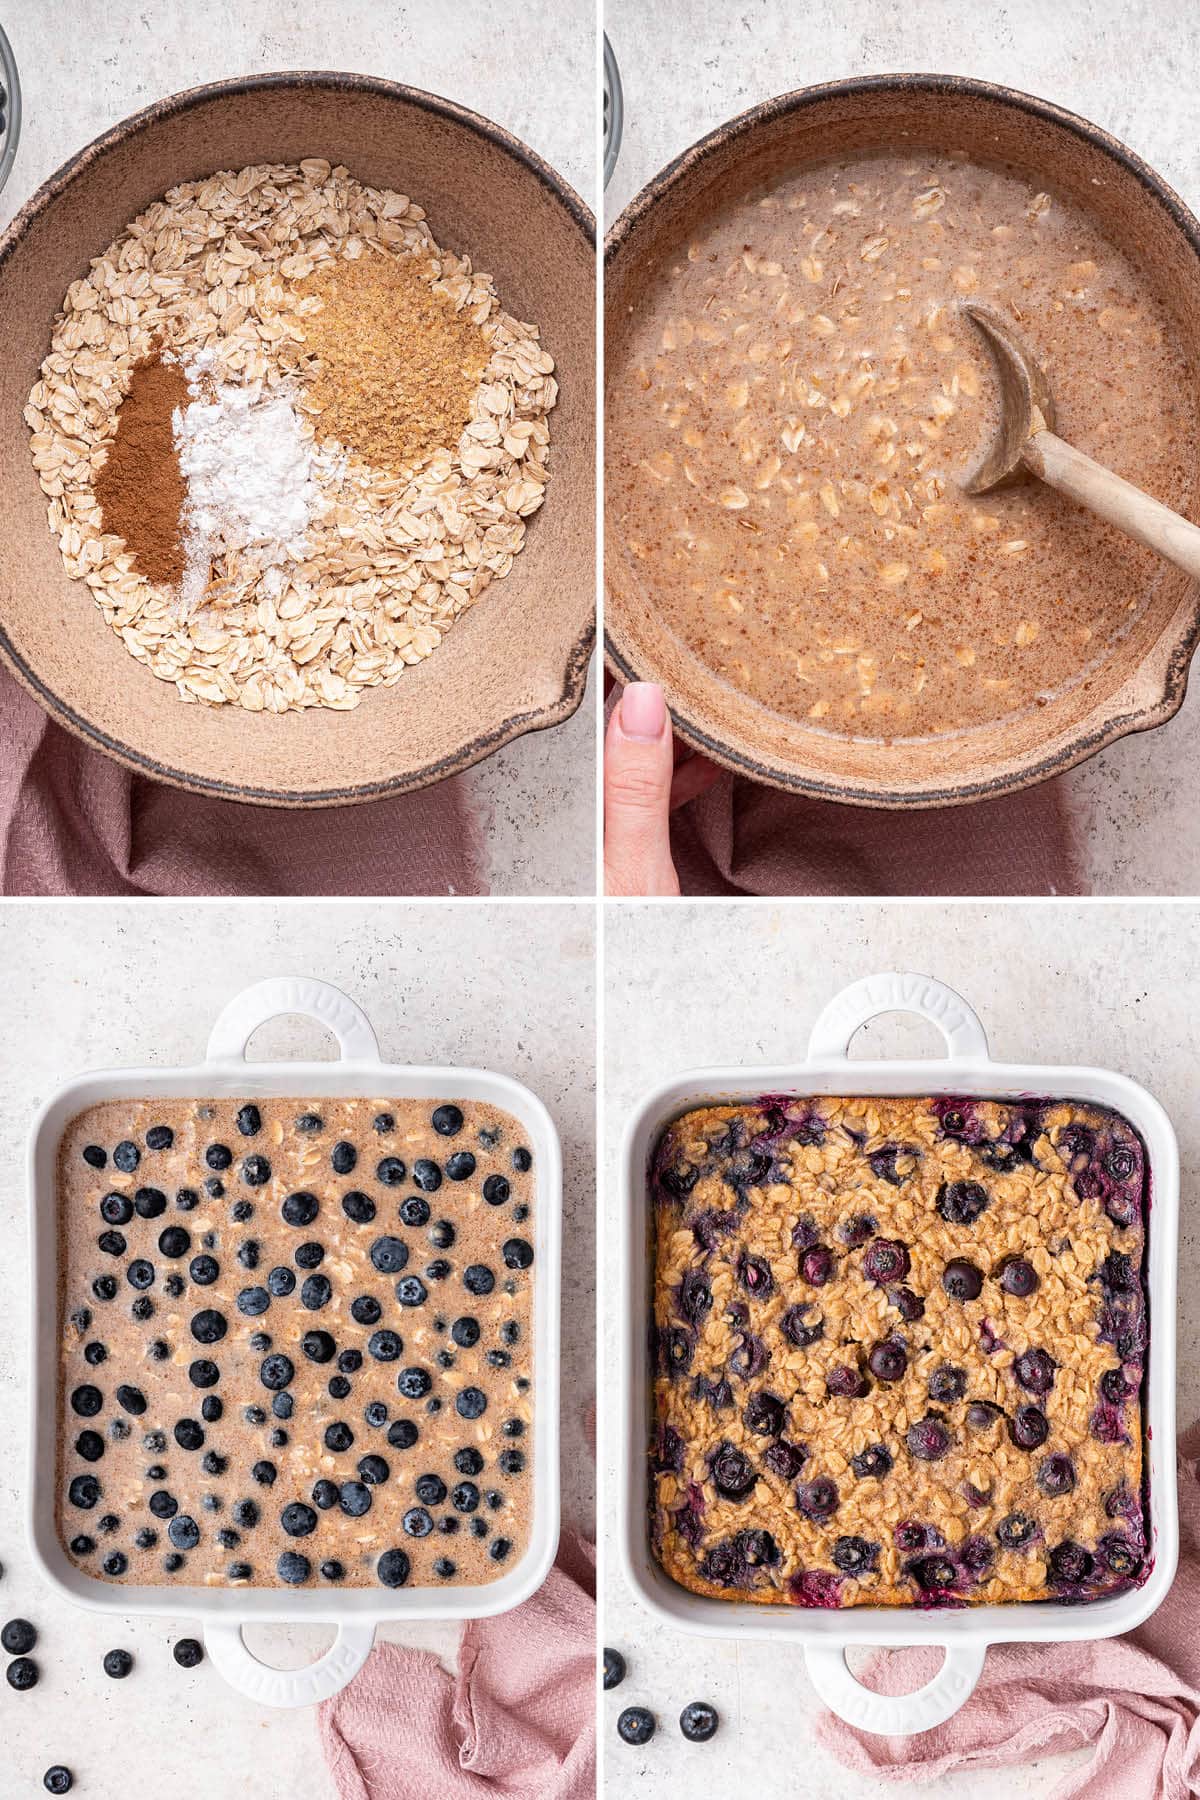 Collage of four photos showing the steps to make Blueberry Baked Oatmeal: mixing the batter, pouring into a casserole dish, topping with blueberries and baking.